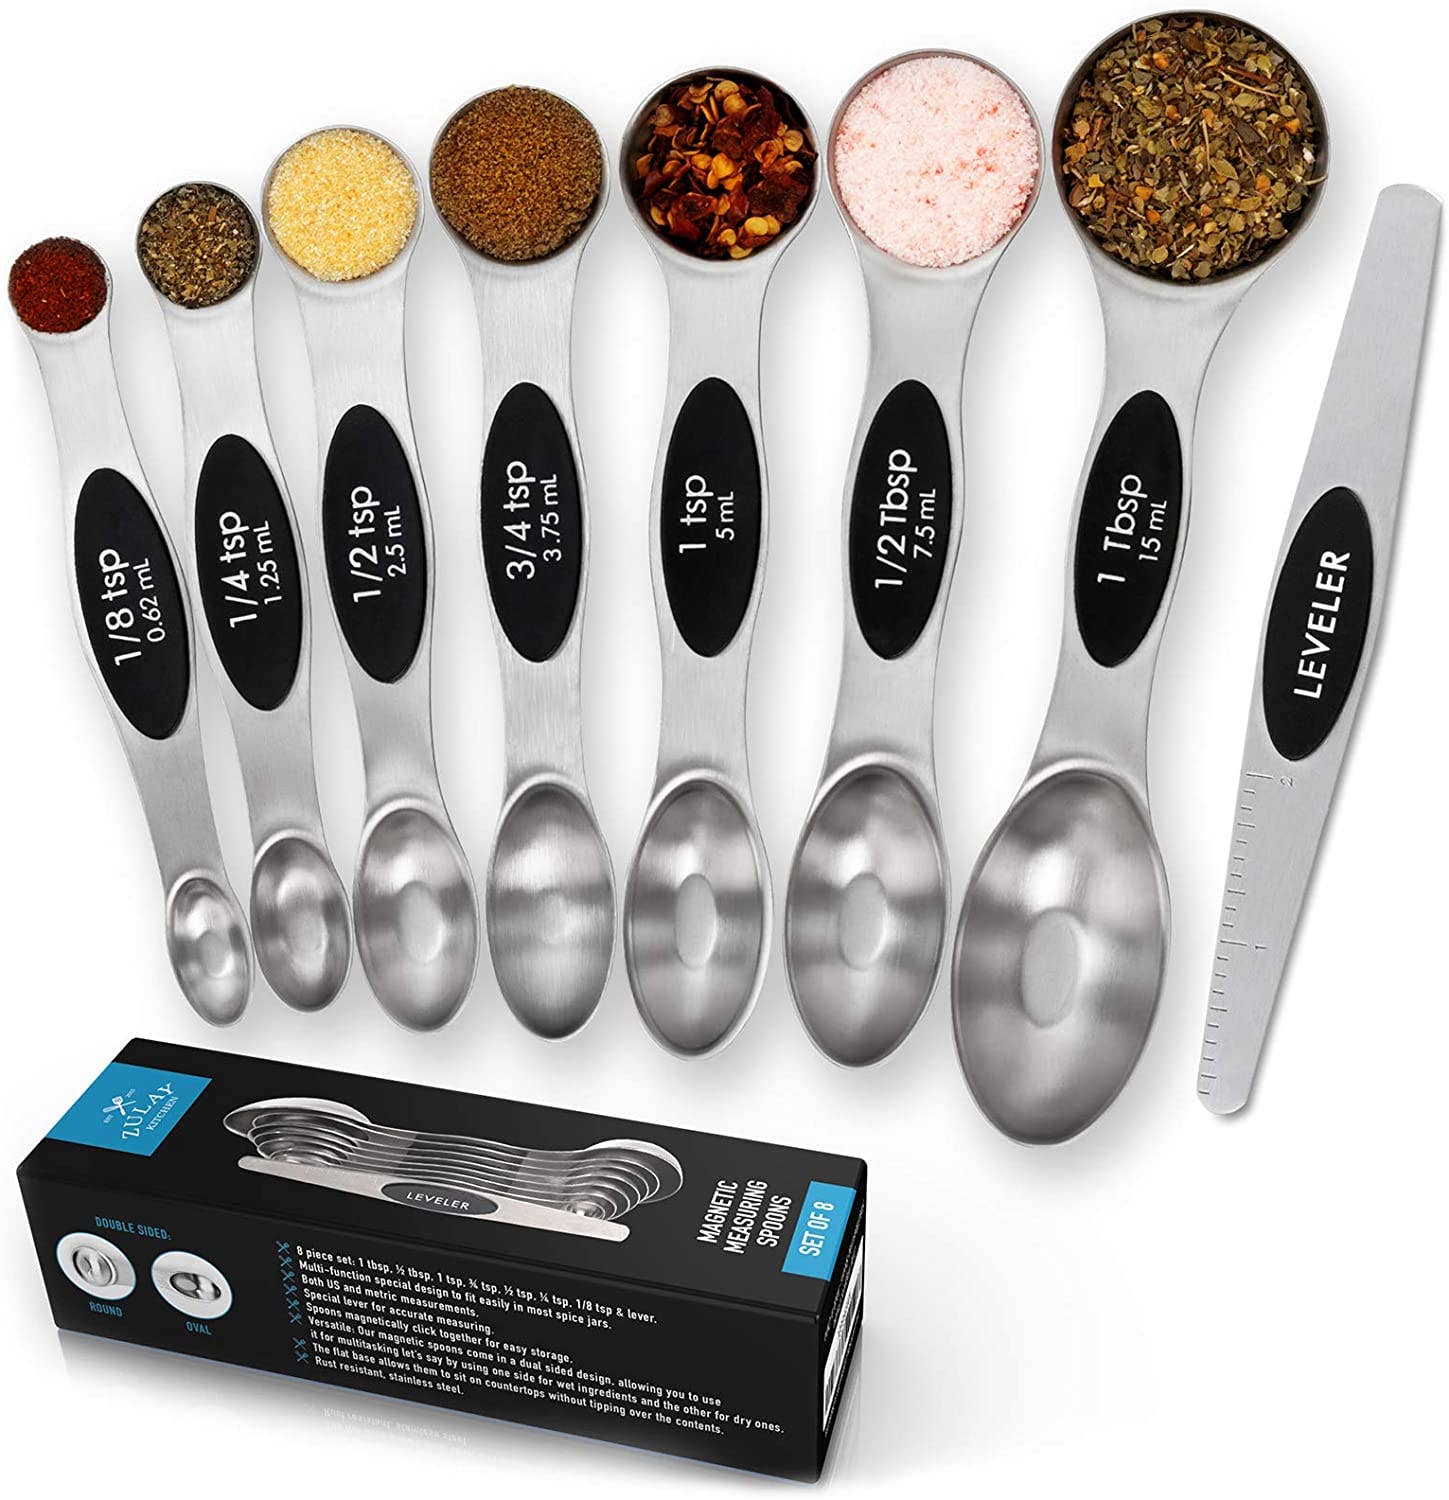 Premium Stainless Steel Magnetic Measuring Spoons 8 Pc Set